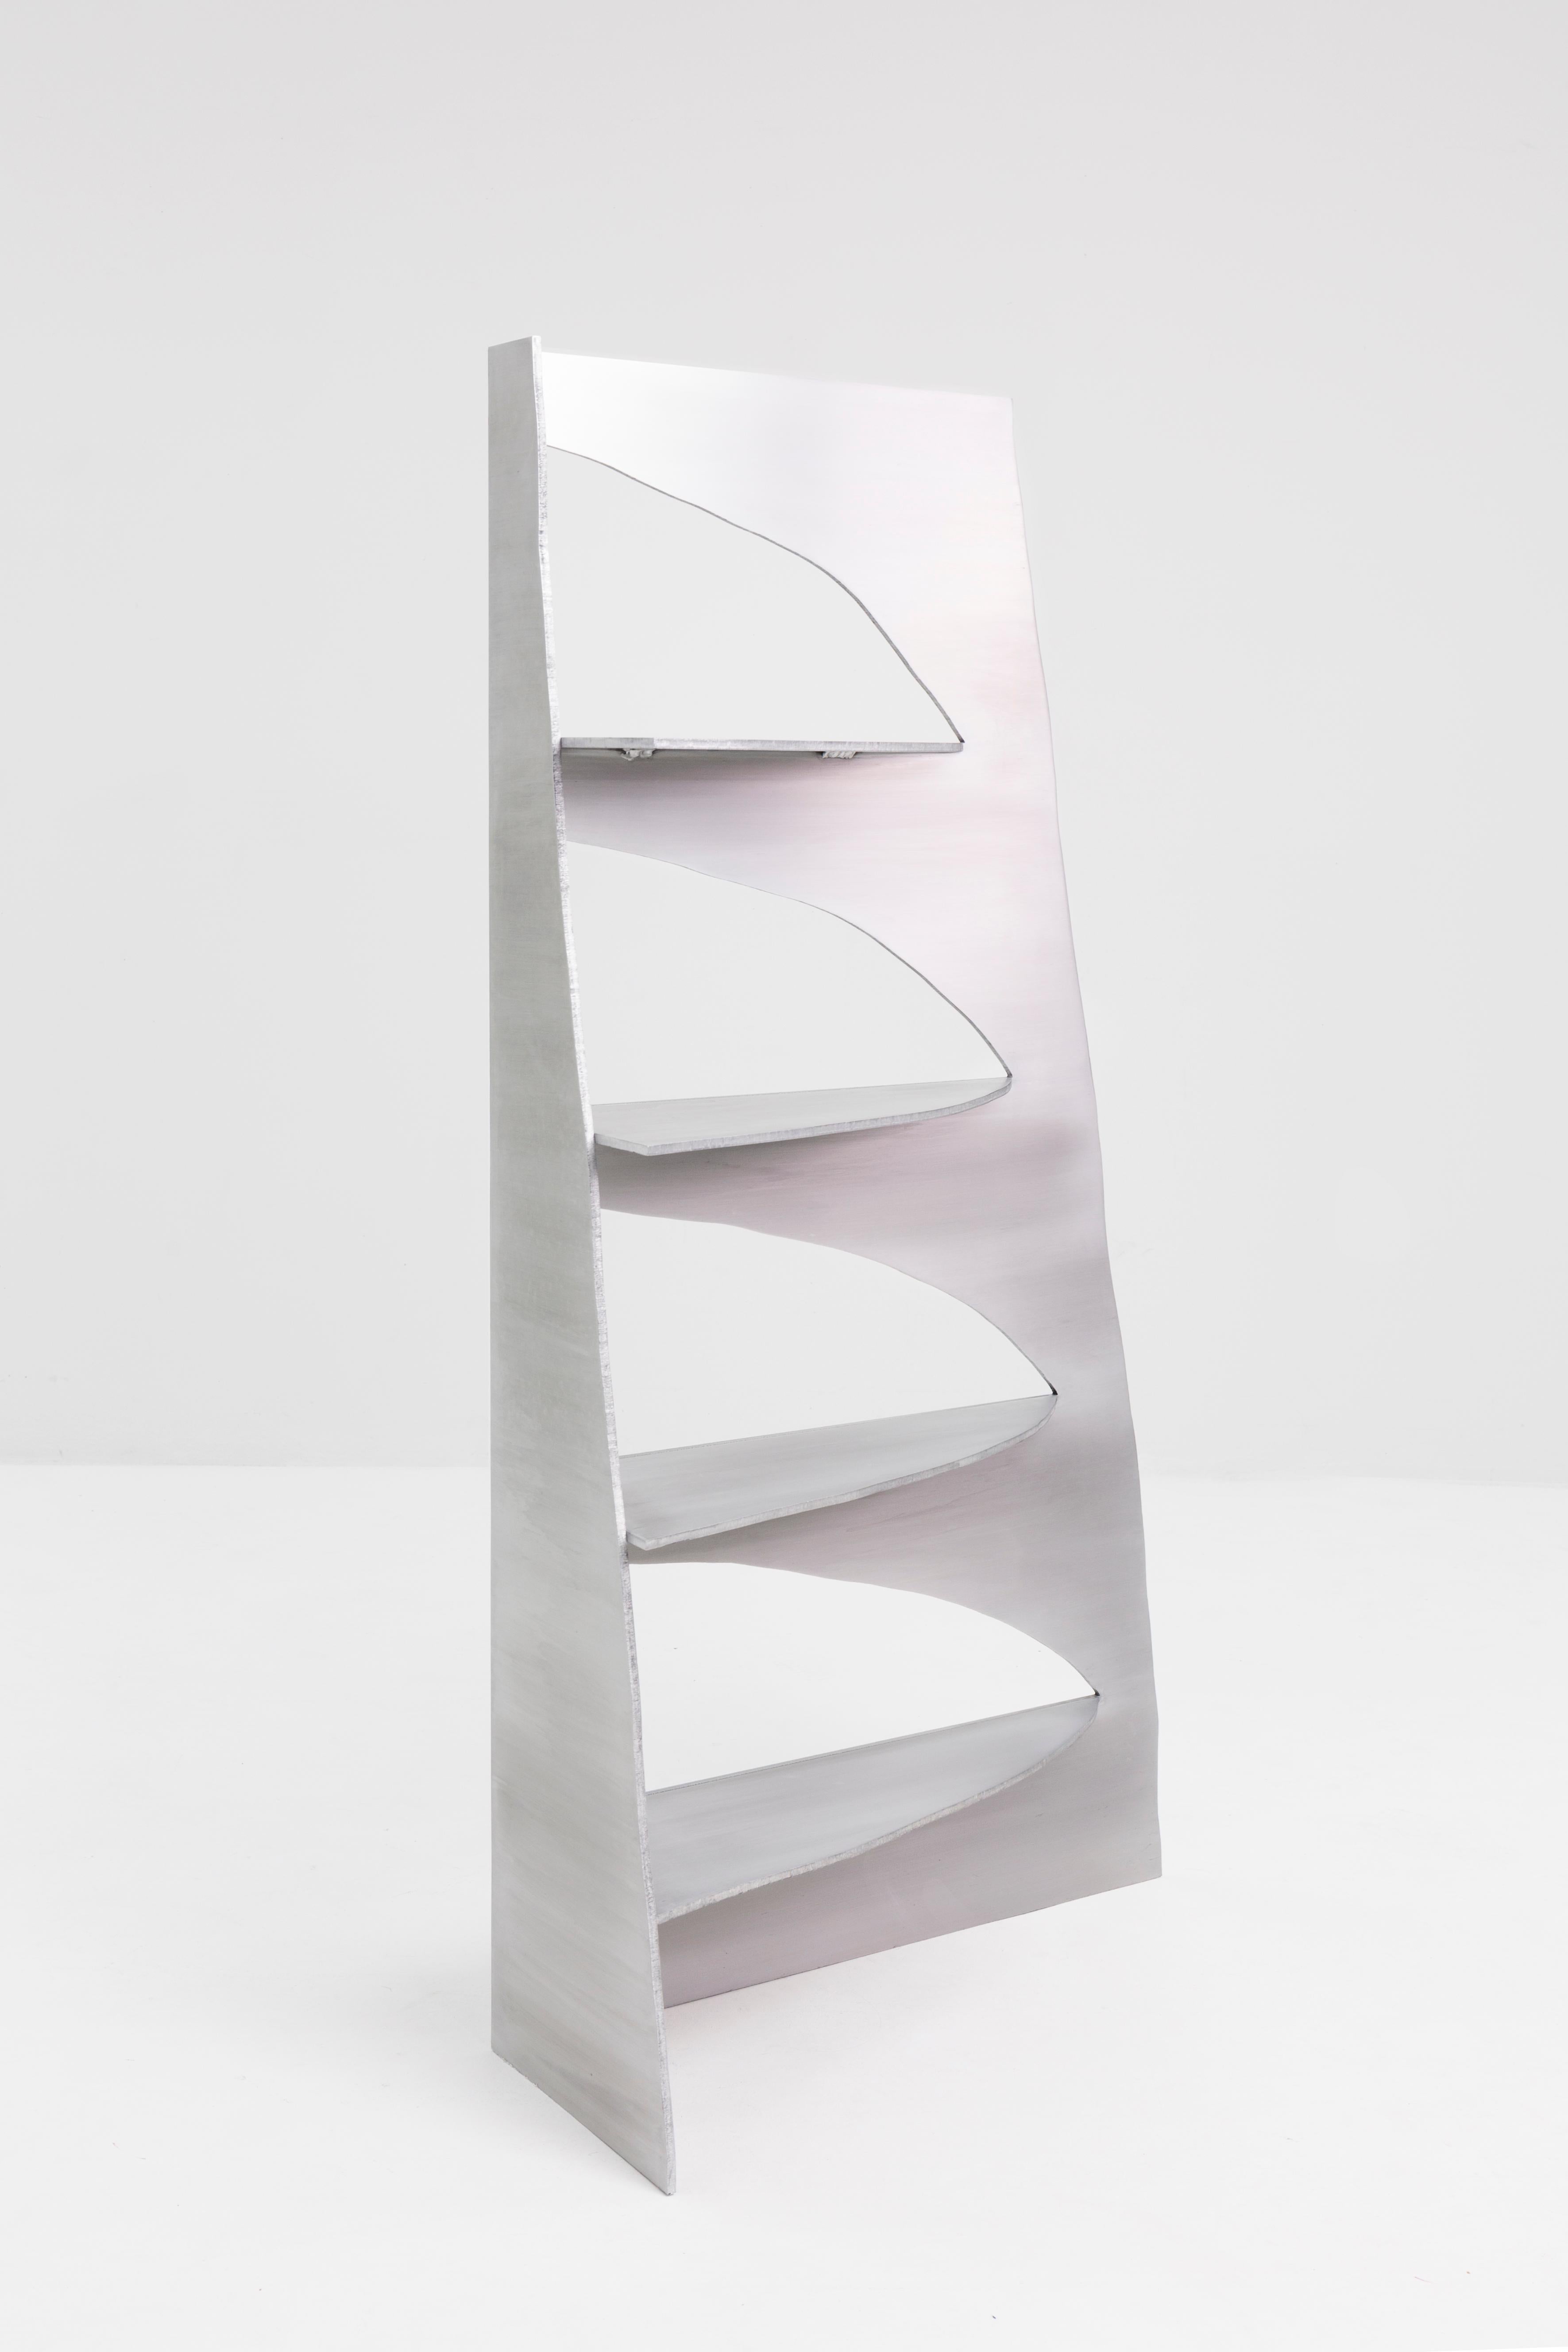 Aluminum rational jigsaw shelf by Studio Julien Manaira
Dimensions: 72.5 x 25 x 140 cm
Materials: Brushed and waxed aluminum


The intention behind this project is to highlight the traces from the actions of the maker. In this sense, the choice of